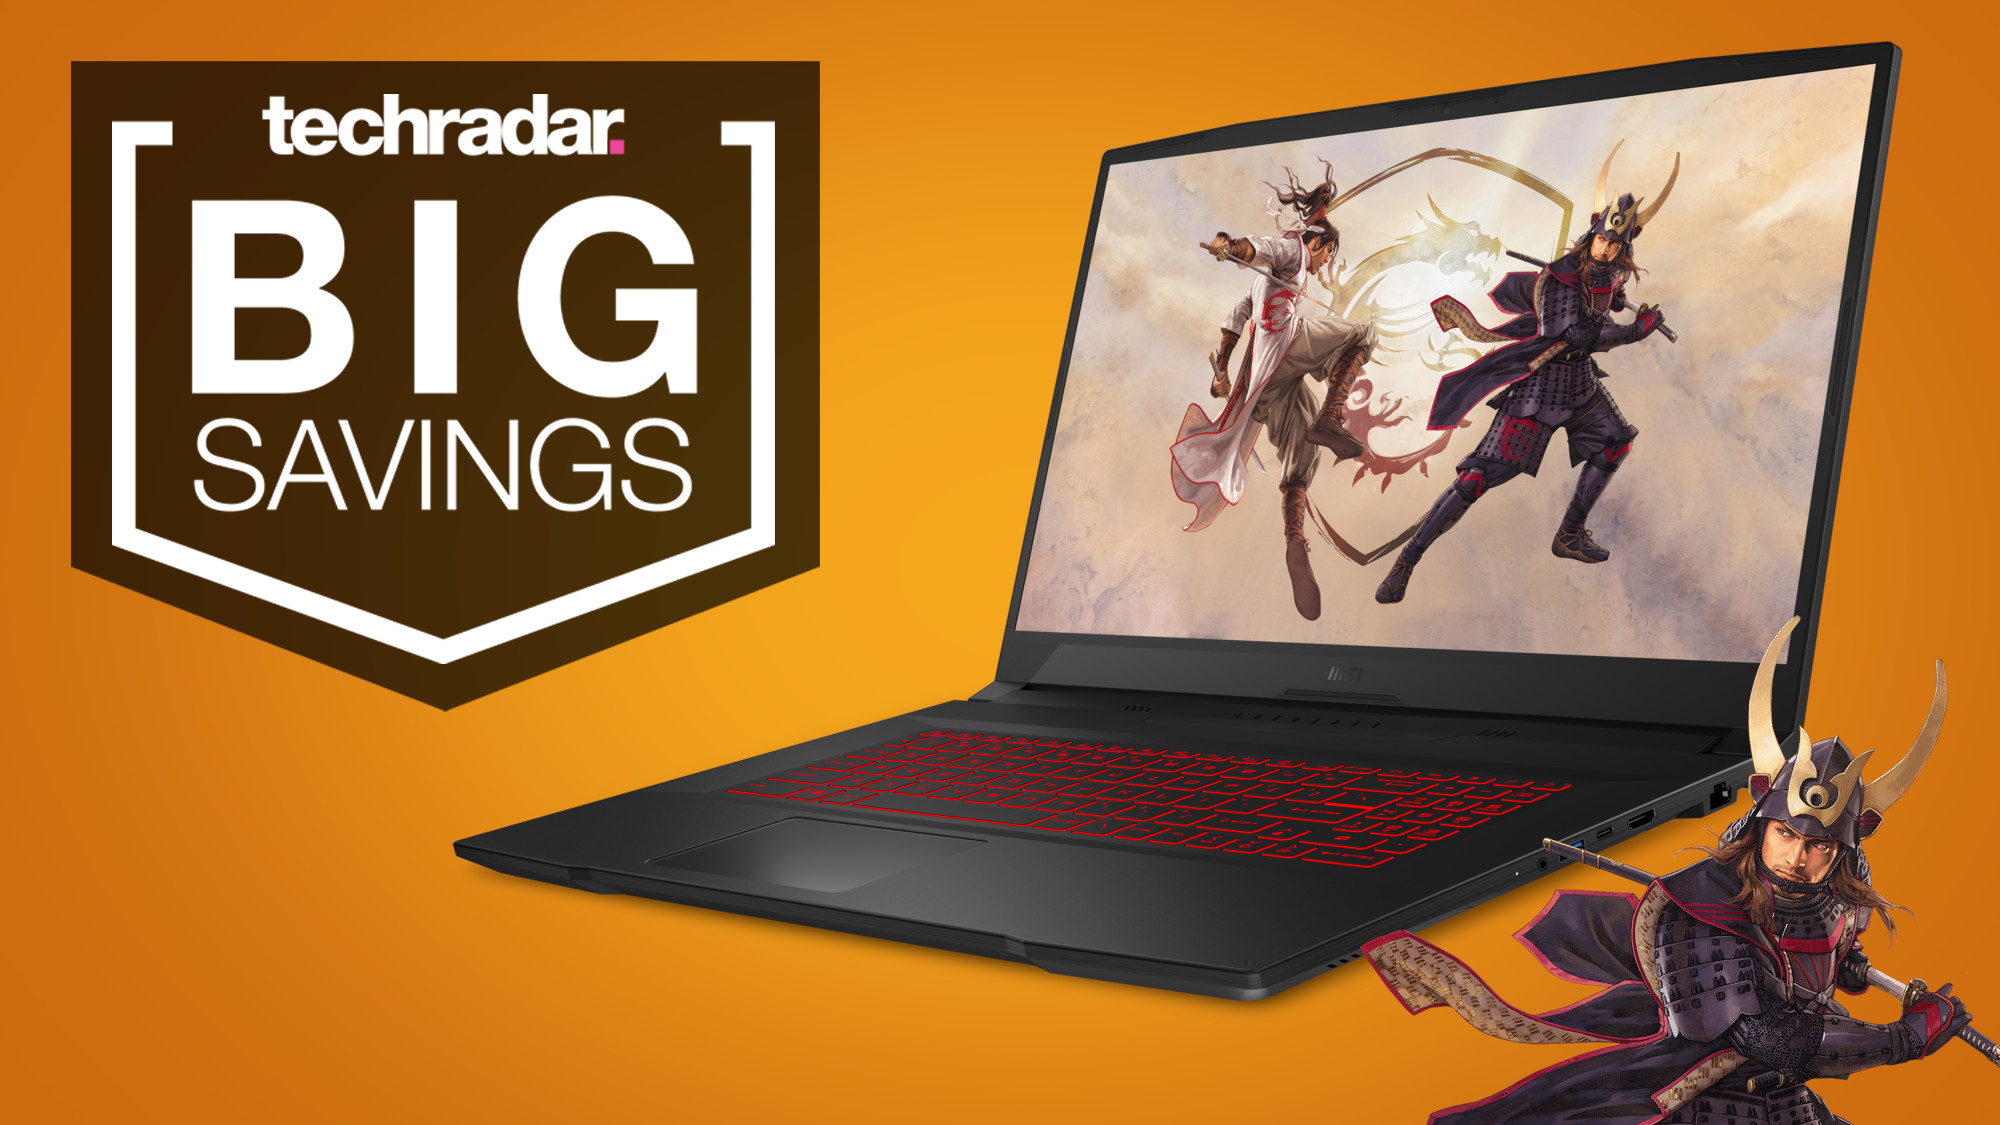 This early Black Friday gaming laptop deal comes with a free sword